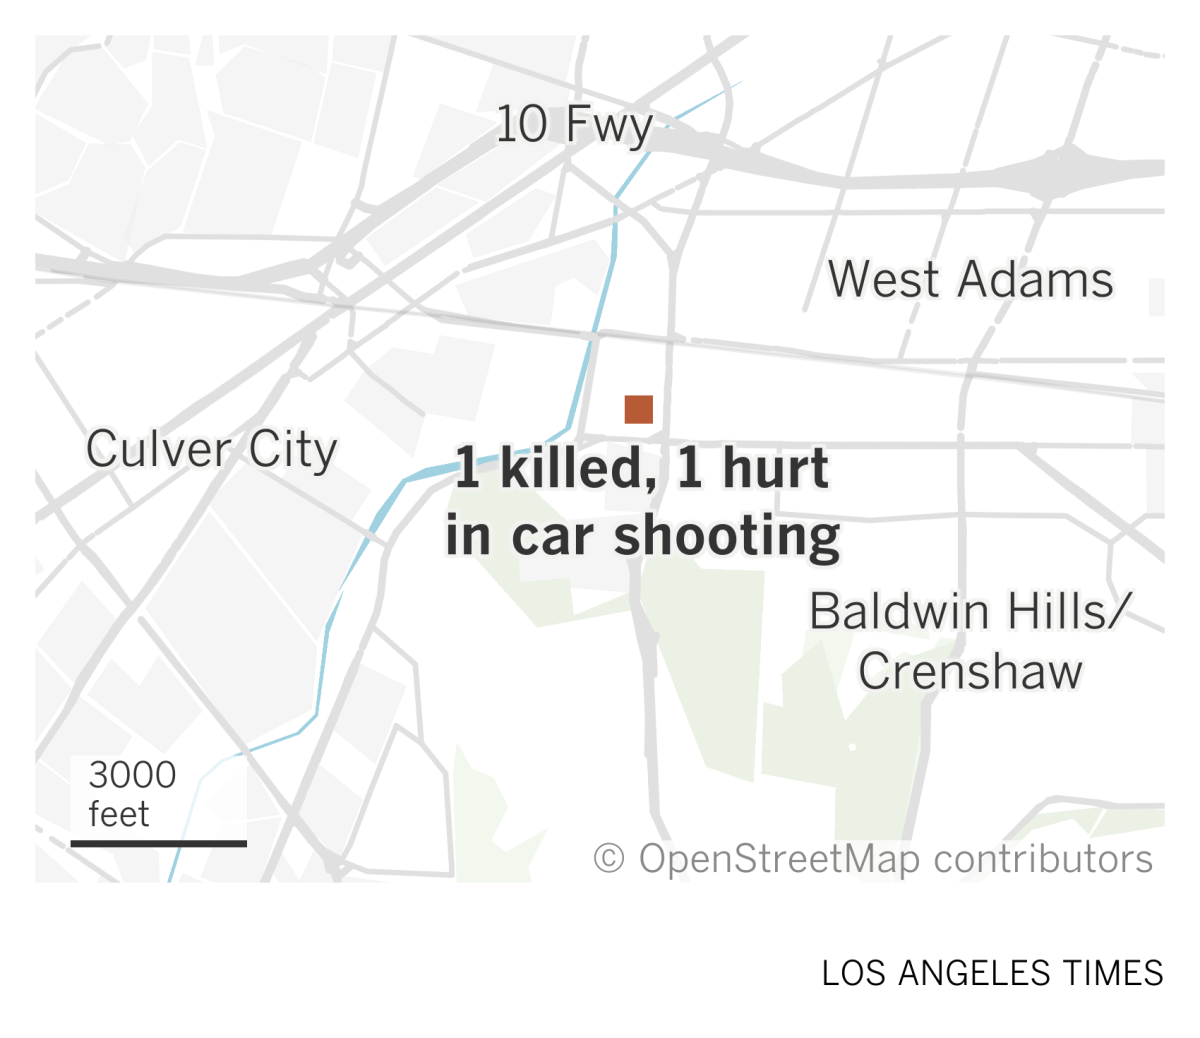 A map of the area near Baldwin Hills/Crenshaw shows where a shooting left 1 person killed and 1 hurt